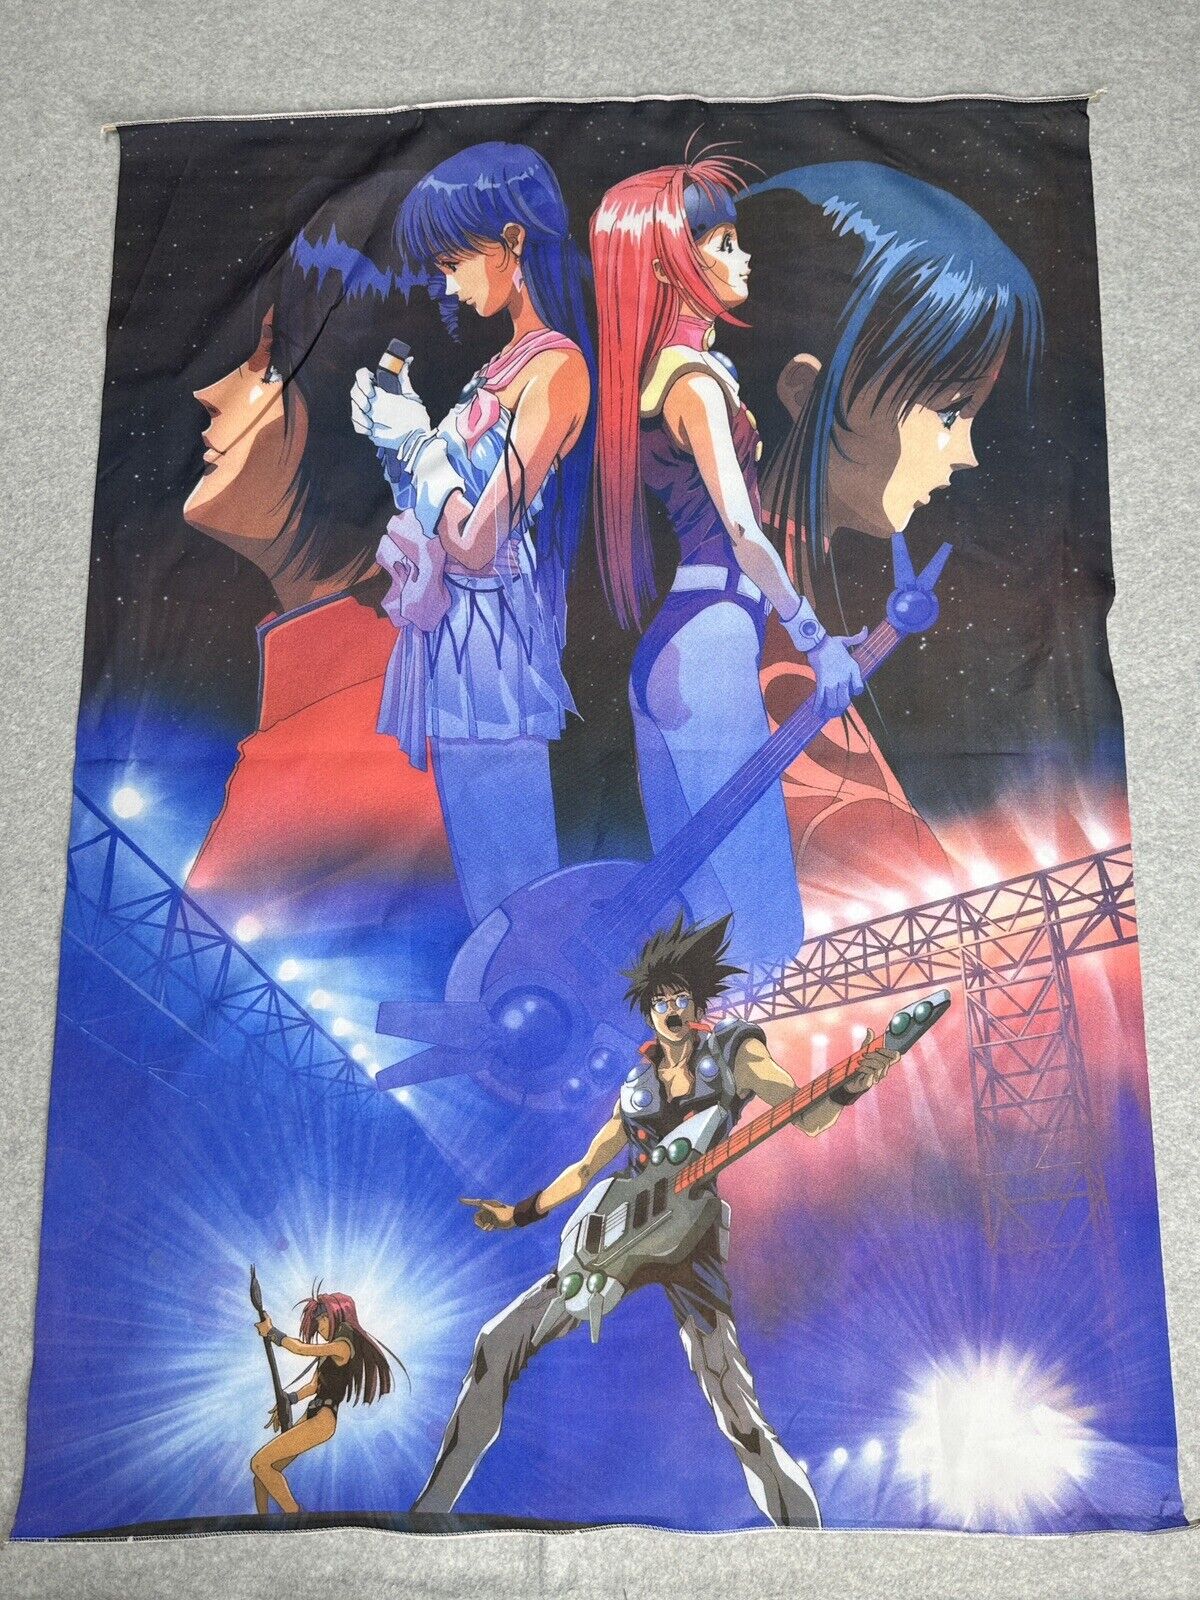 VINTAGE Macross 7 Plus Anime Wall Scroll Tapestry Poster Rare Robotech Minmay